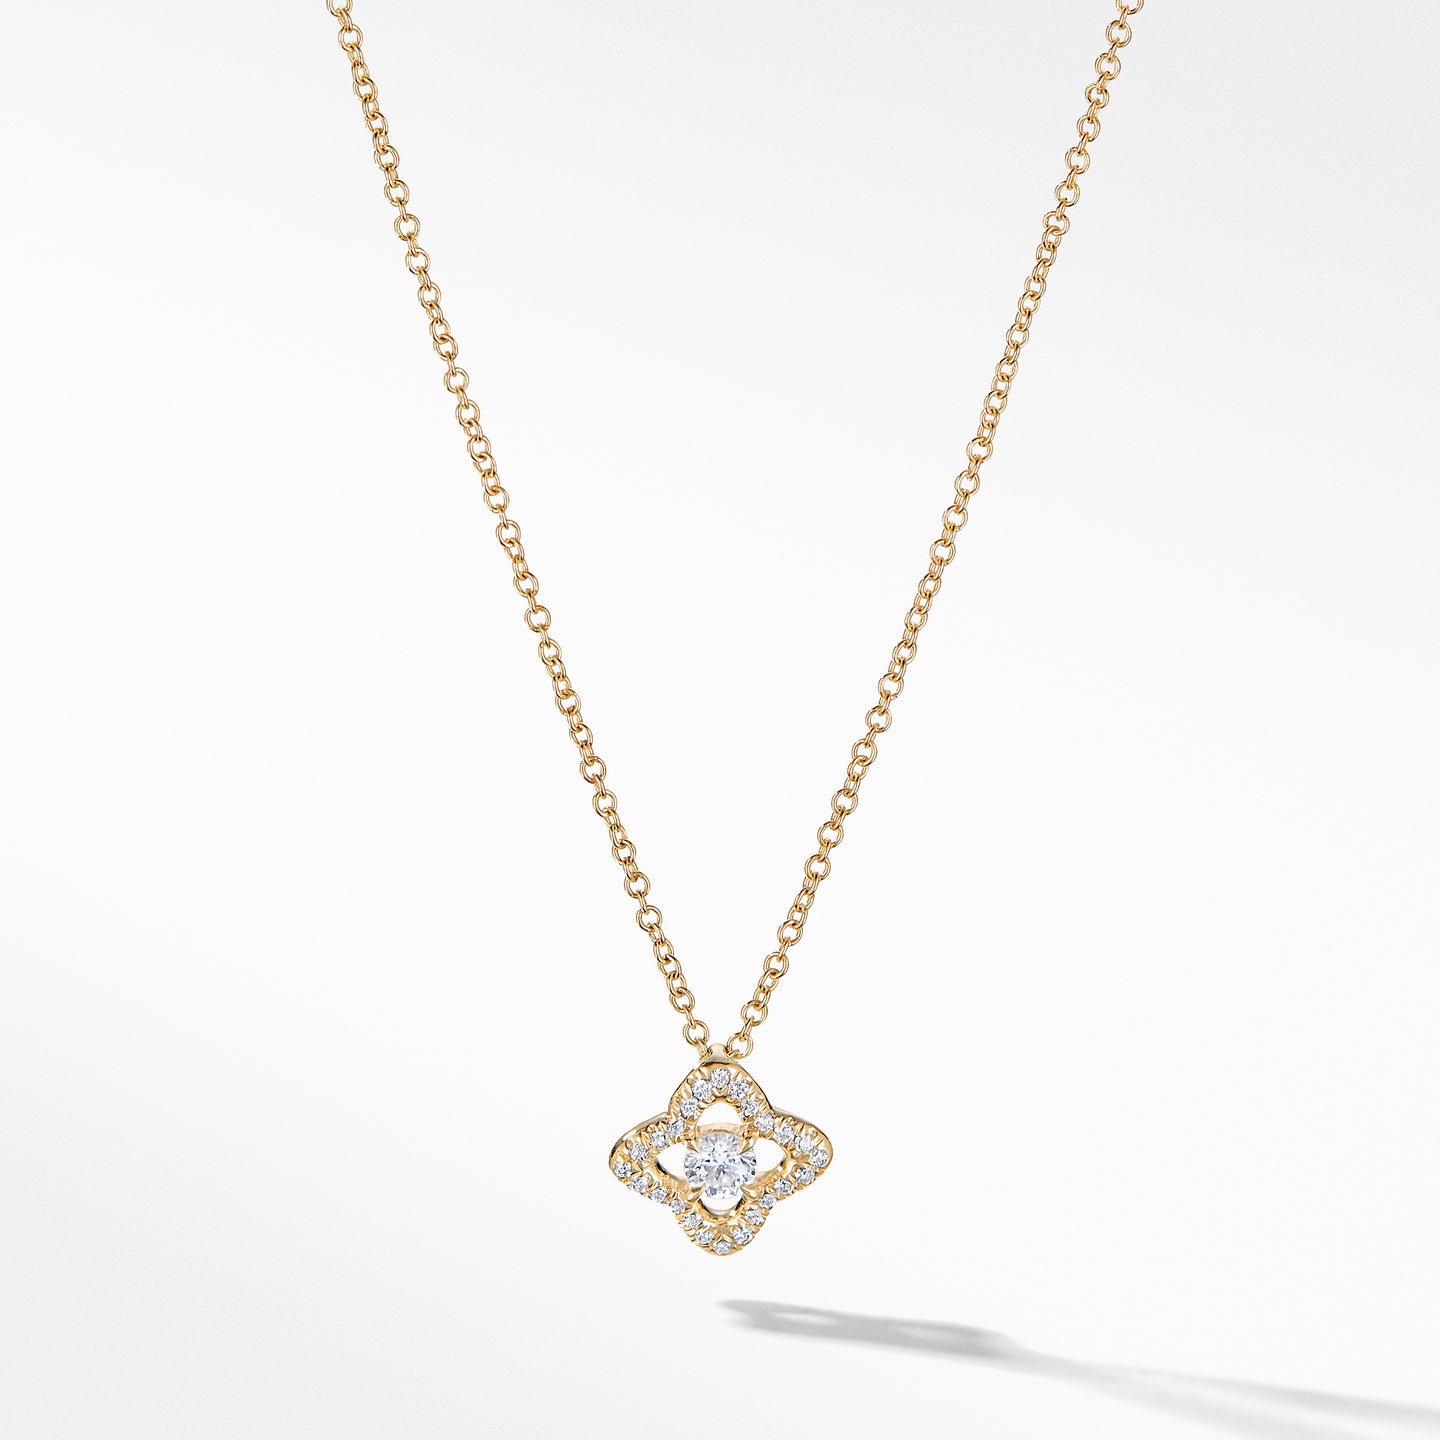 Necklace with Diamonds in 18K Gold, 18